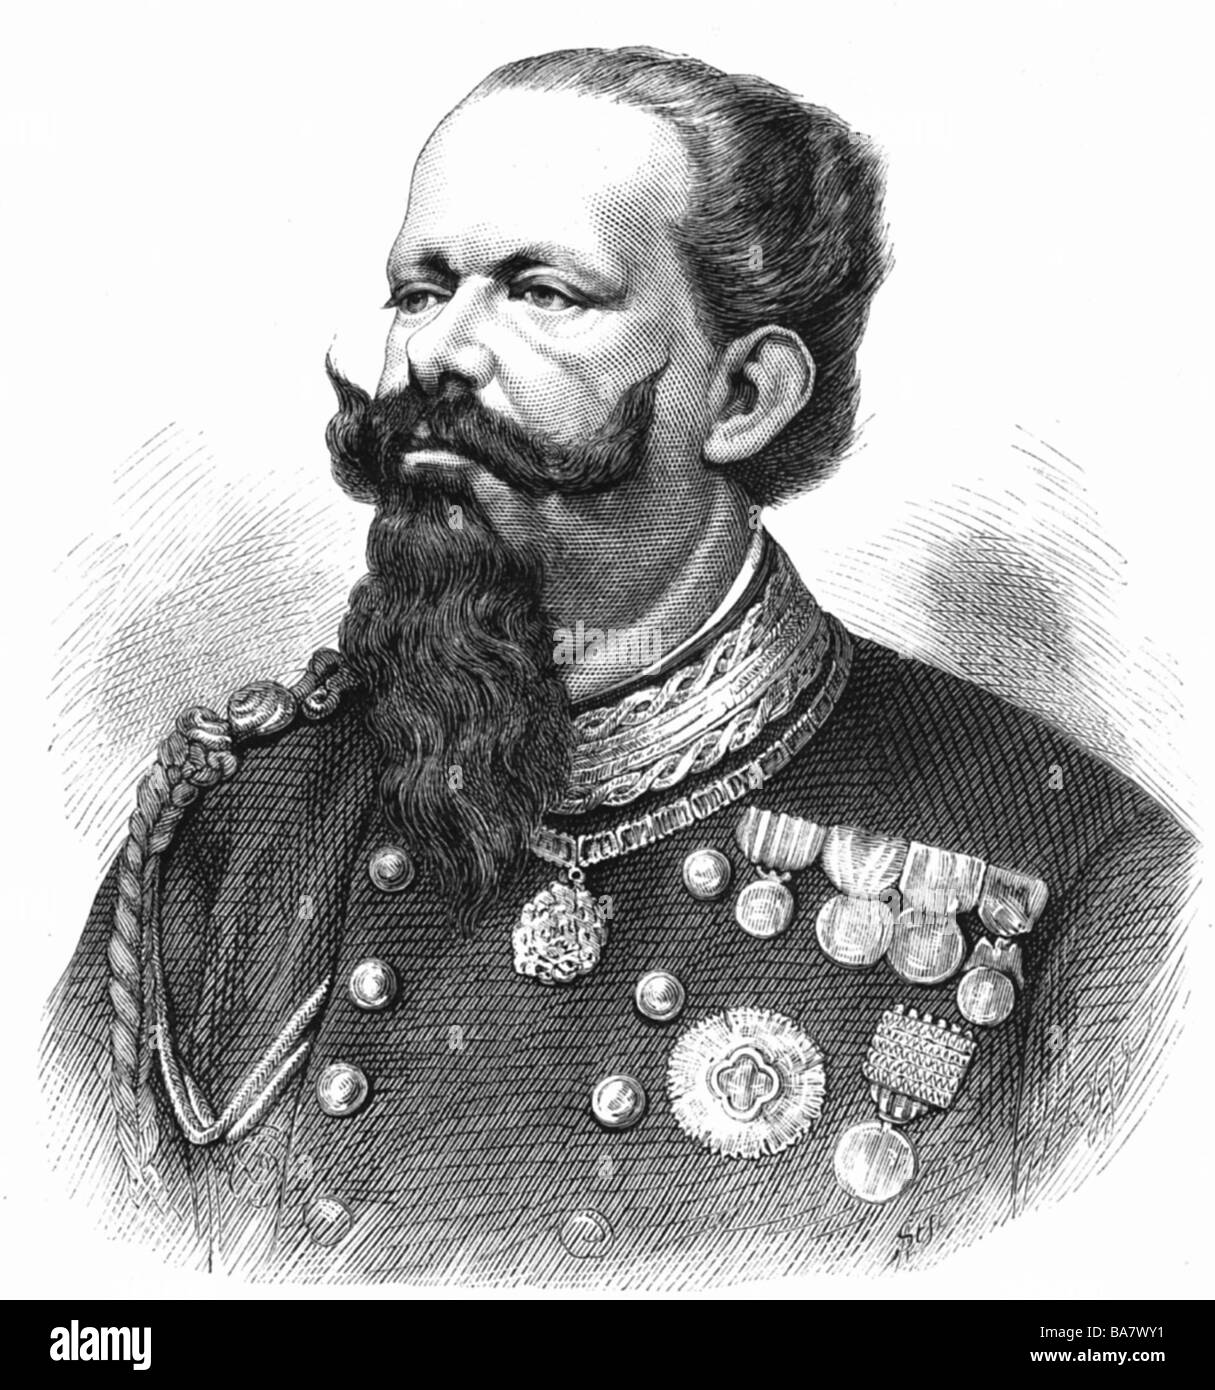 Victor Emmanuel II, 14.3.1820 - 9.1.1878, King of Sardinia (1849 - 1861) and Italy (1861 - 1878), portrait, wood engraving, 1873, Stock Photo